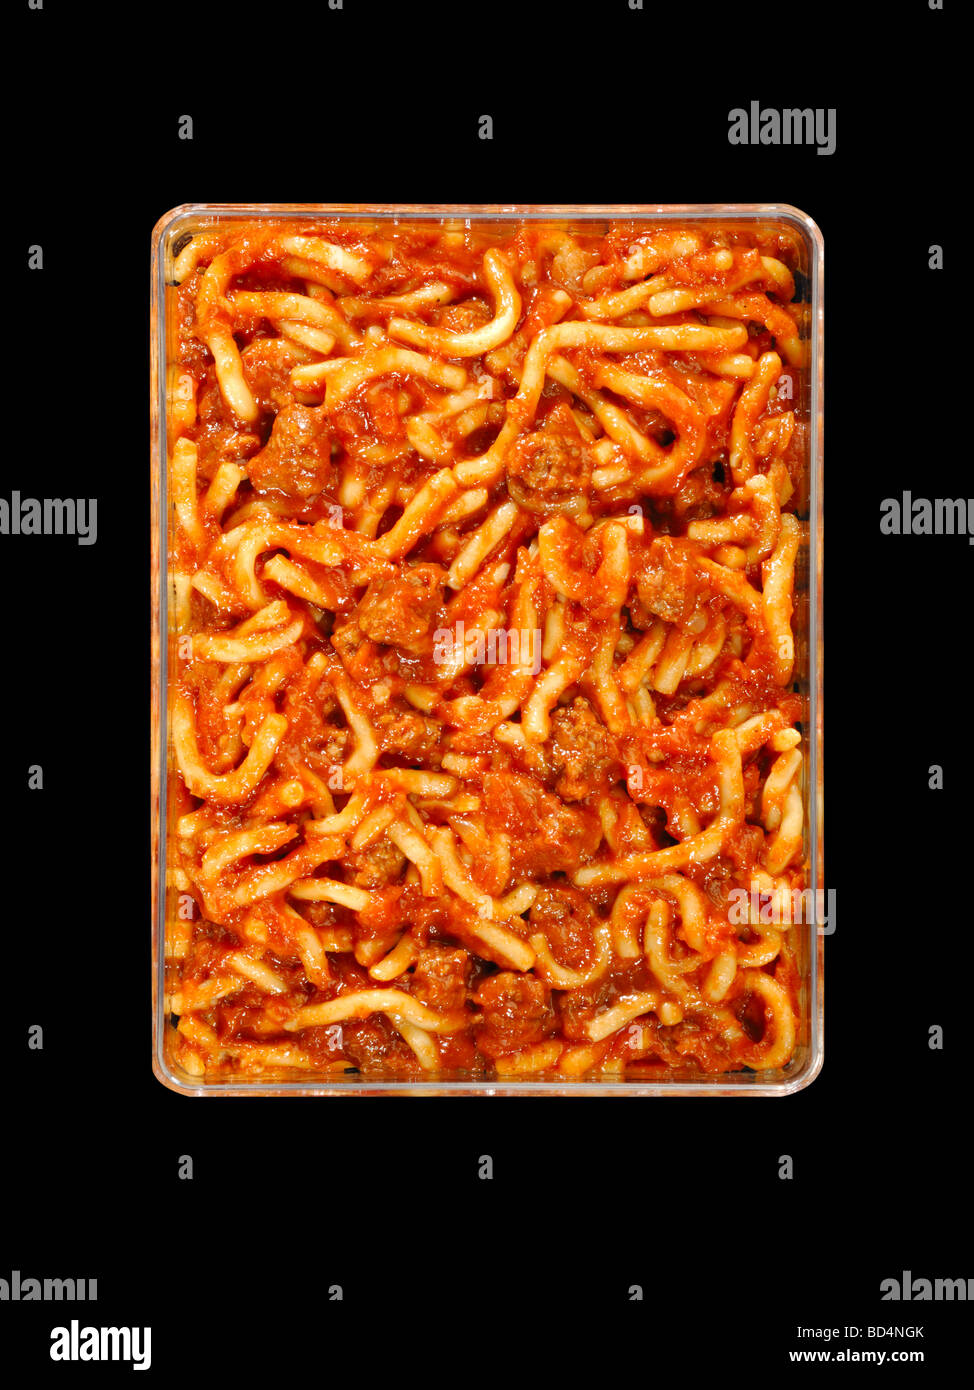 A plastic container with military food rations, spaghetti pasta bolognese Stock Photo